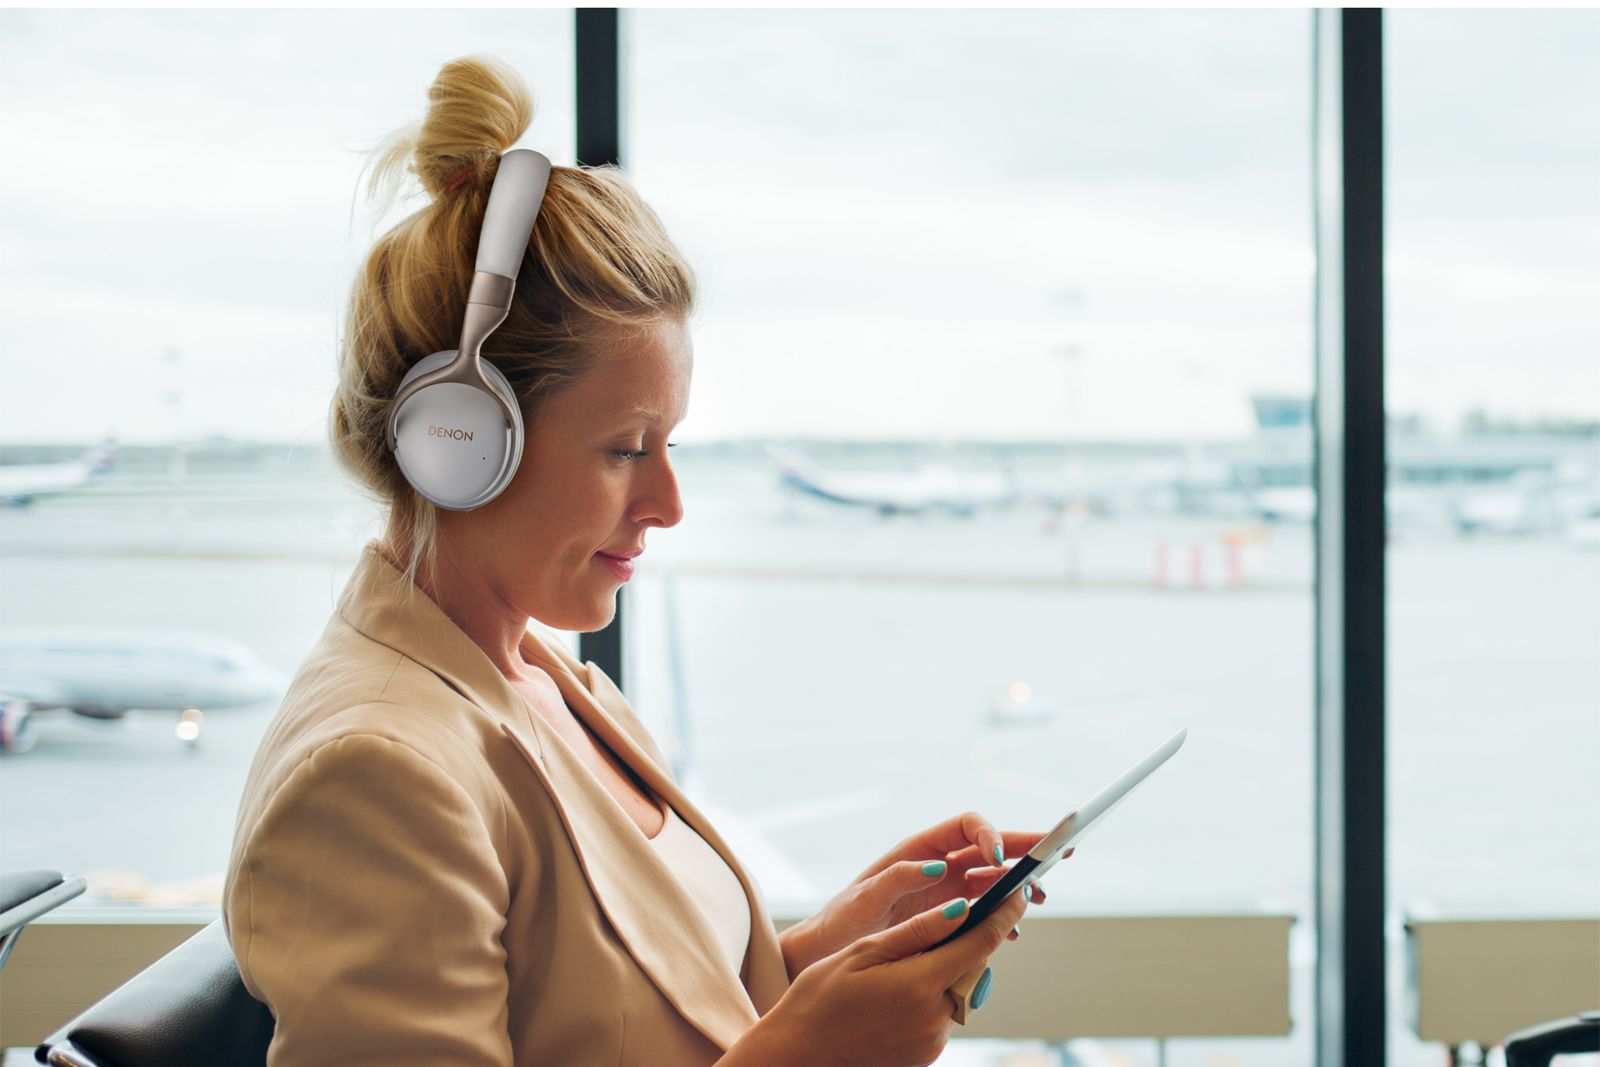 Denons GC travel headphone range has noise cancelling and wiredwireless options image 1